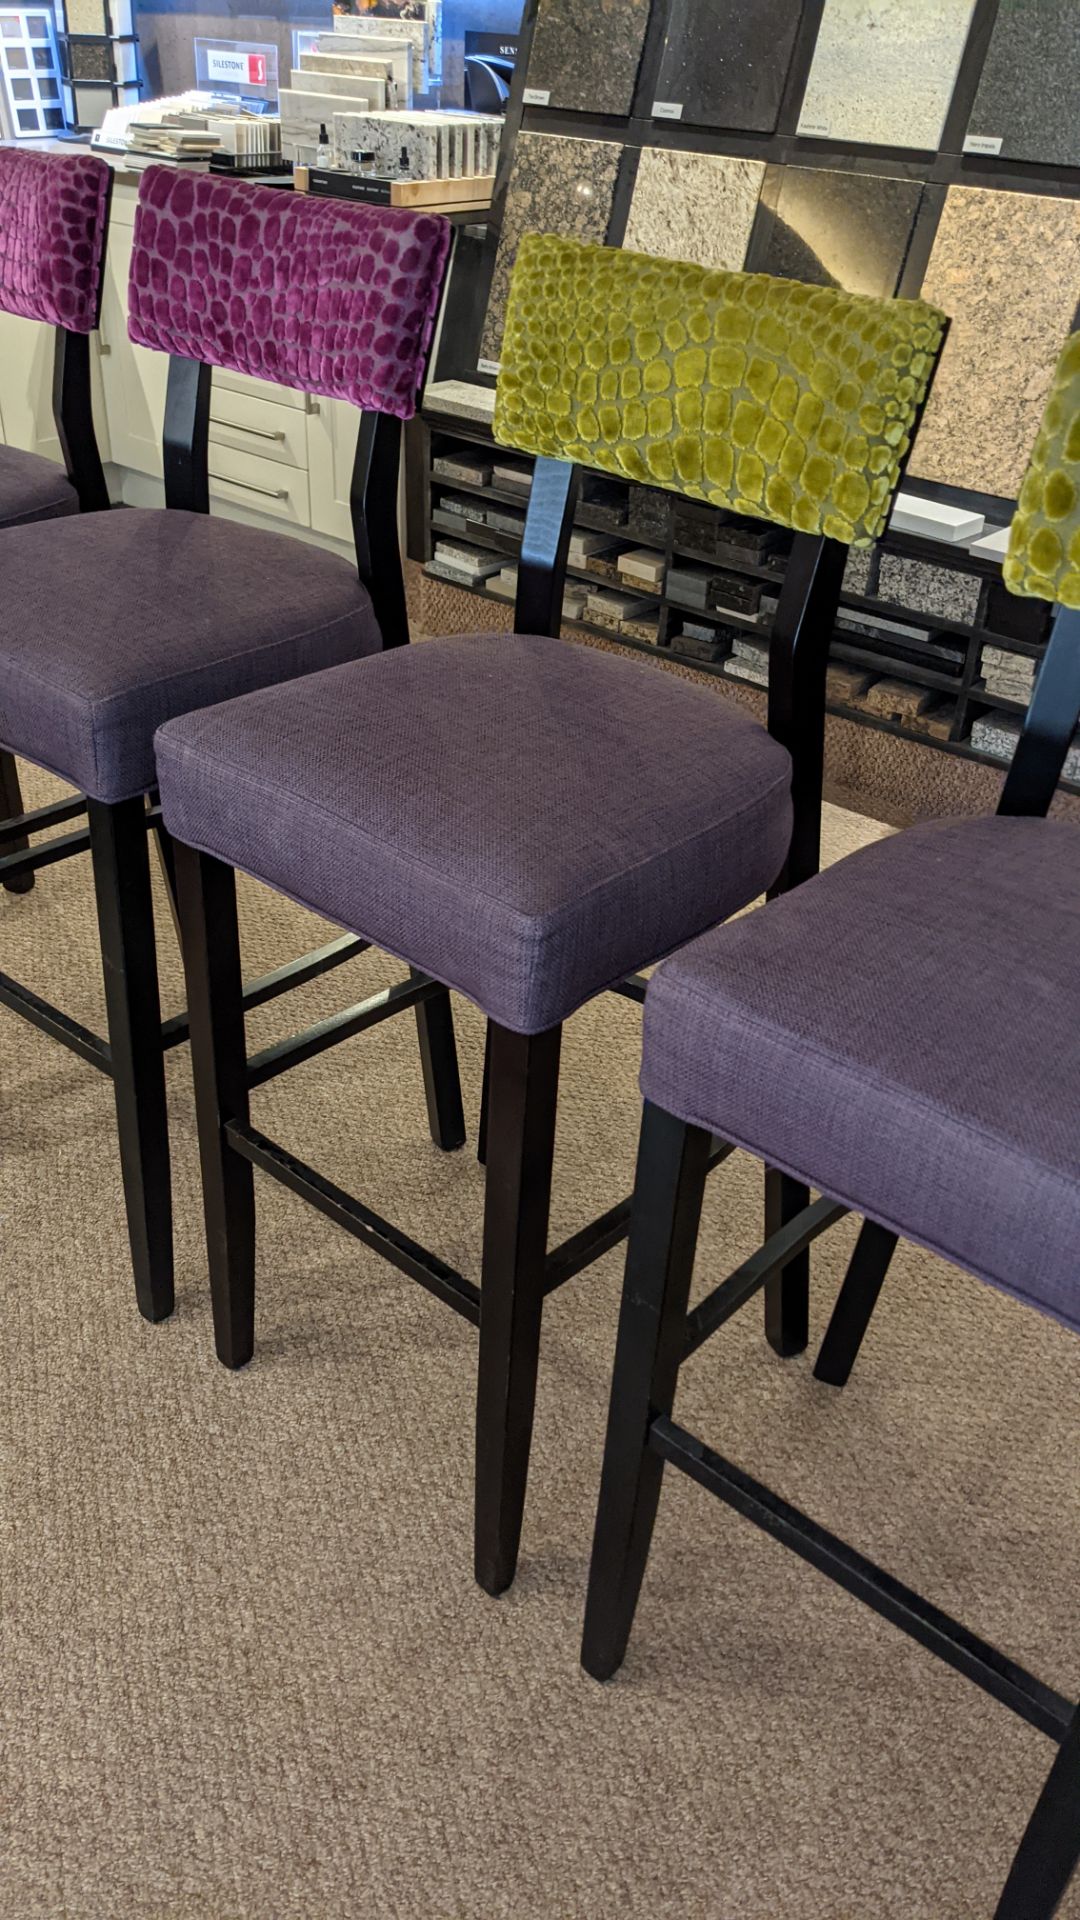 4 matching barstools in 2 different upholstered fabrics - Image 4 of 6